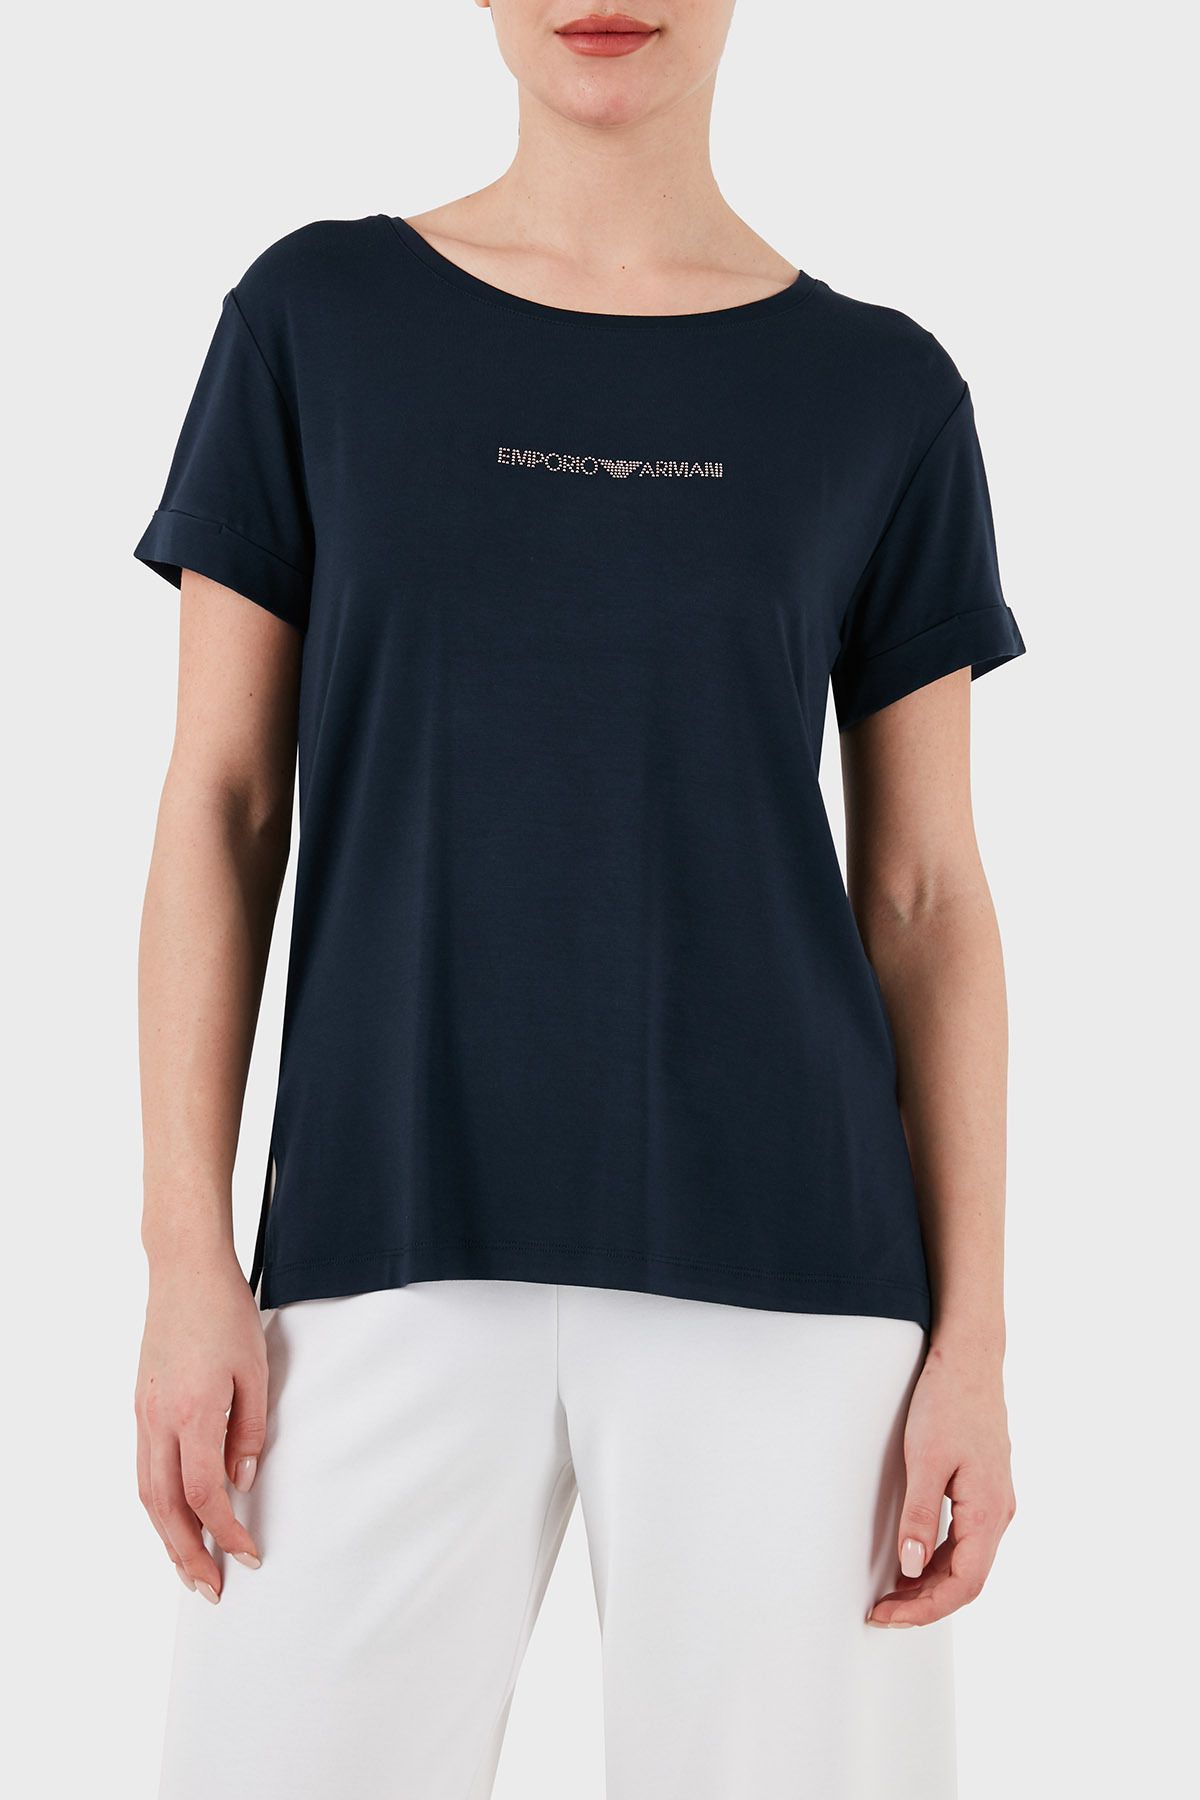 Emporio Armani Relaxed Fit Bisiklet Yaka T Shirt  T SHİRT 262633 4R314 00135